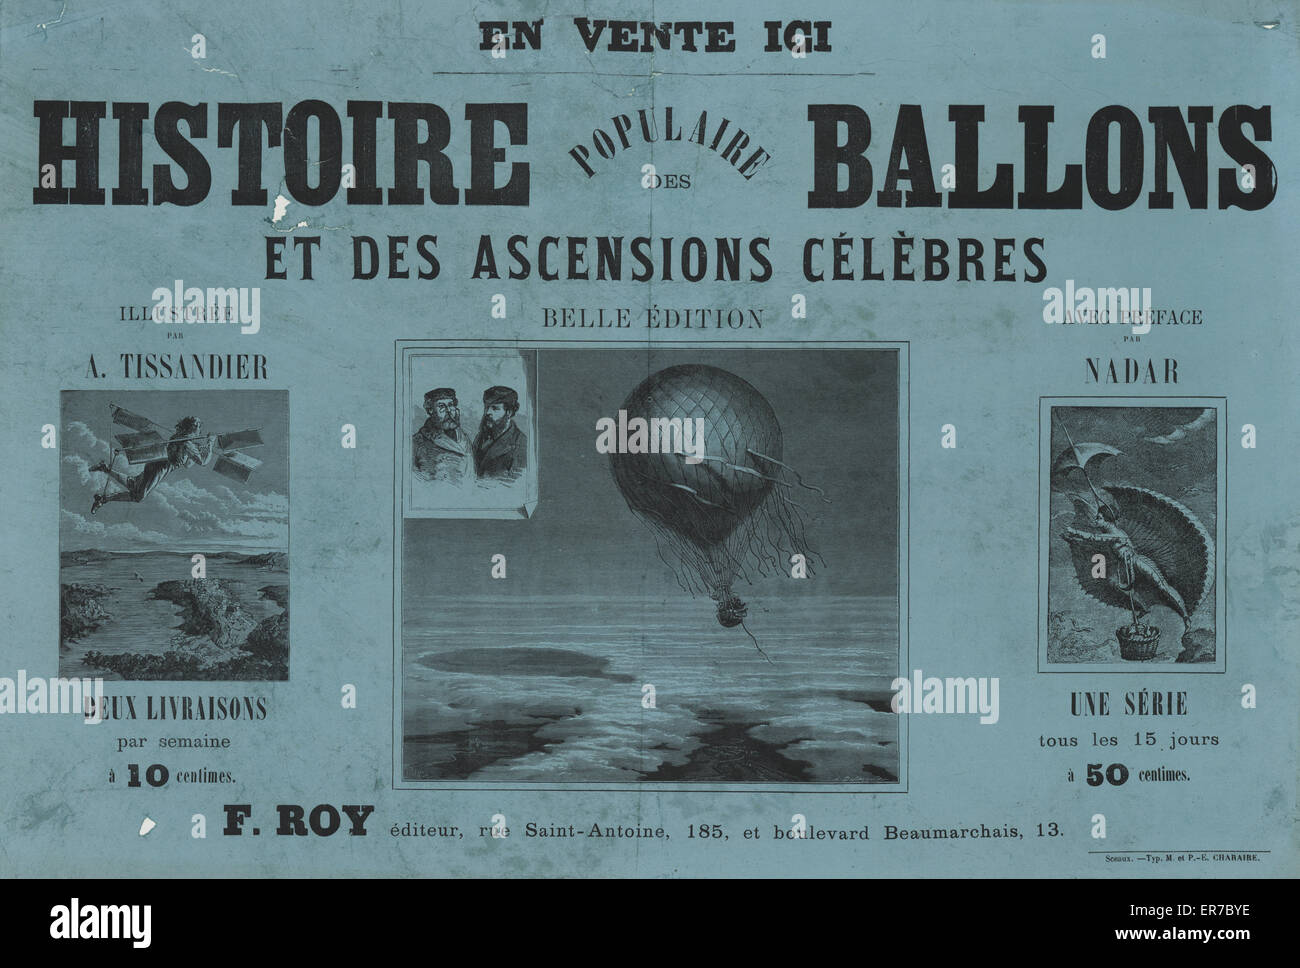 Histoire populaire des ballons et des ascensions celebres  Advertisement for a book by A. Sircos on the history of ballooning, published in 1876 by F. Roy, with illustrations by Albert Tissandier and a preface by F. Nadar. Includes picture of a balloon in Stock Photo